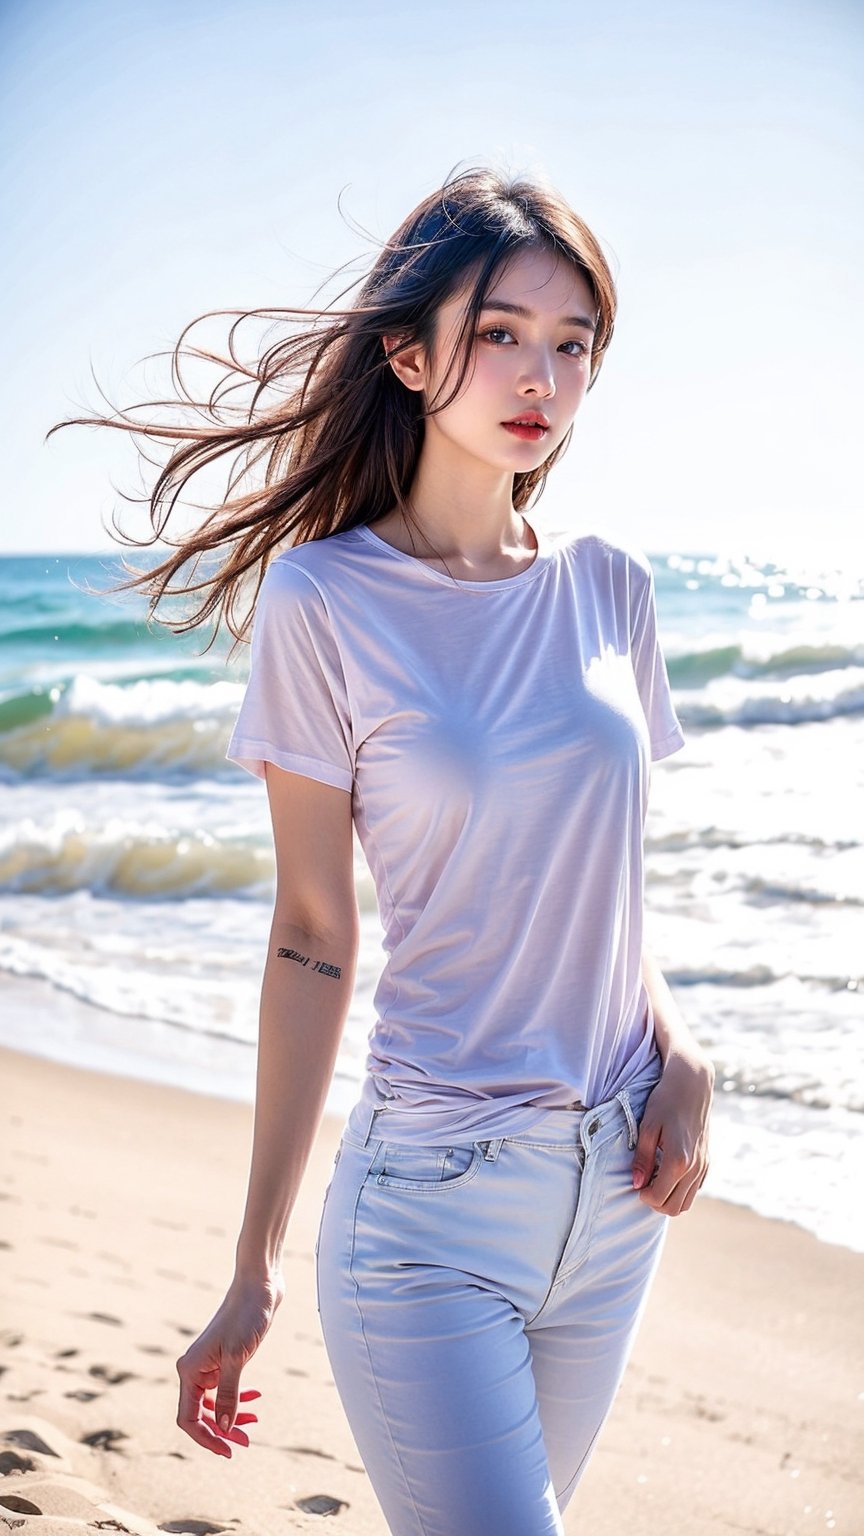 A beautiful Chinese girl looking forward is wearing a T-shirt with white color. The girl is standing on the beach., which enhances her beauty, she looks stunningly beautiful